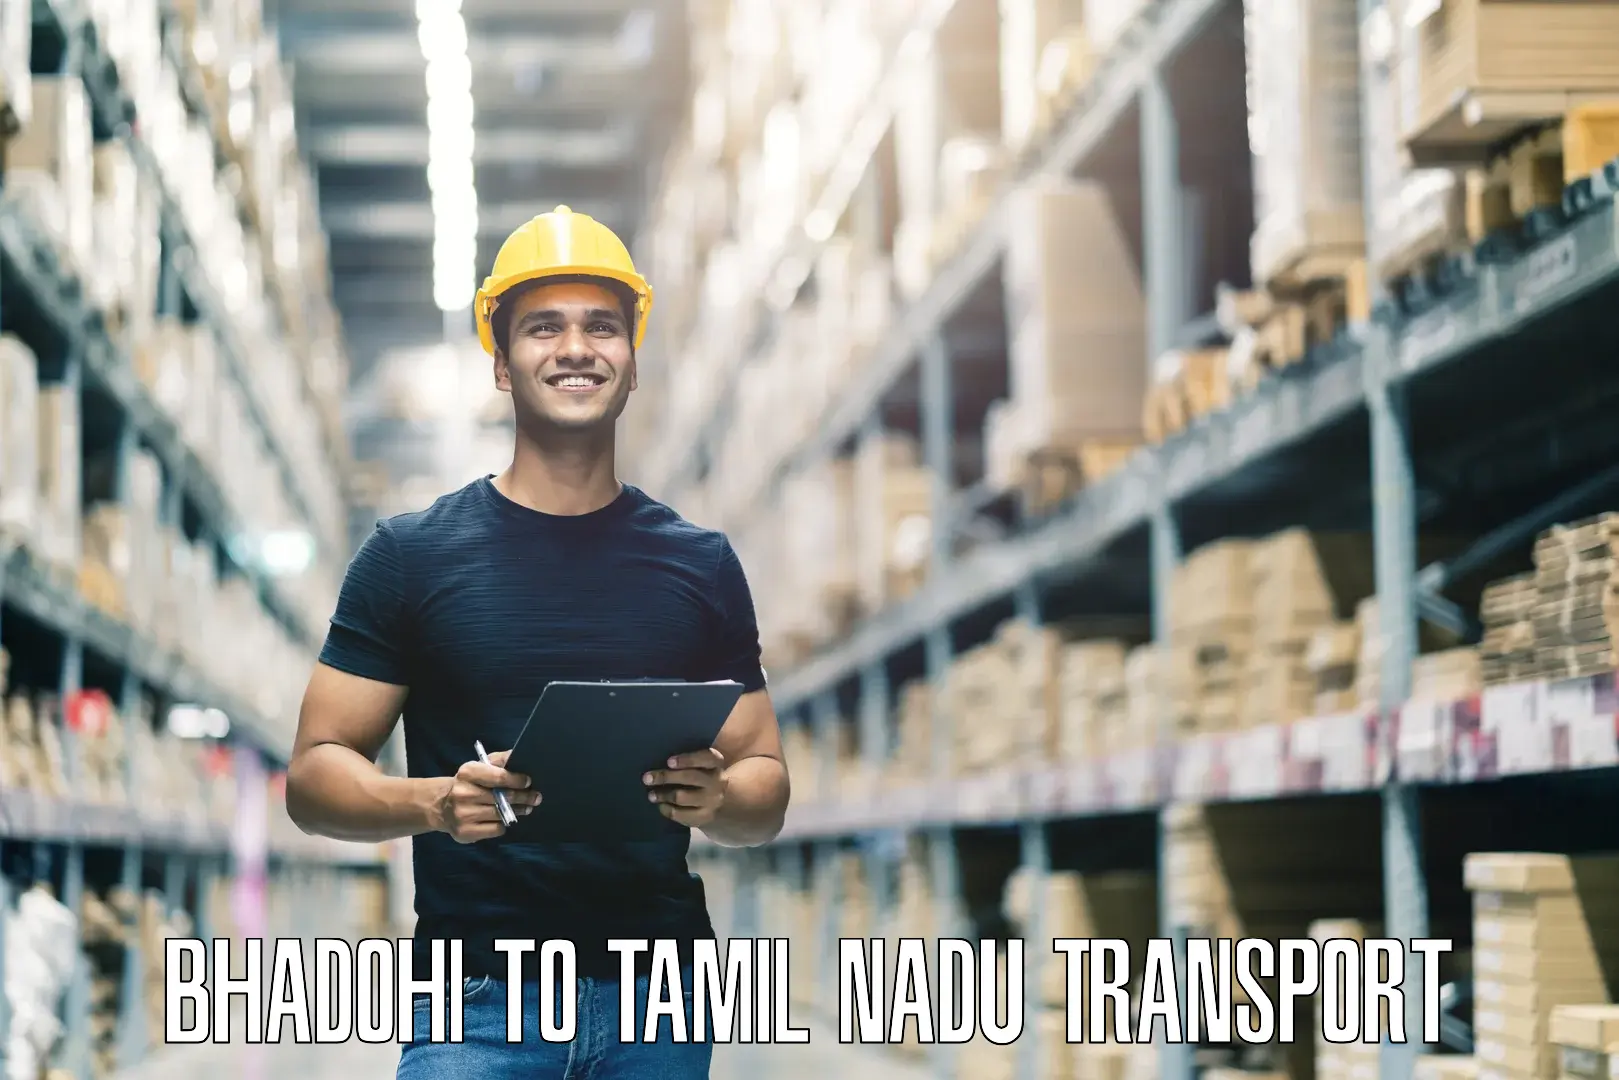 Road transport online services Bhadohi to Natham